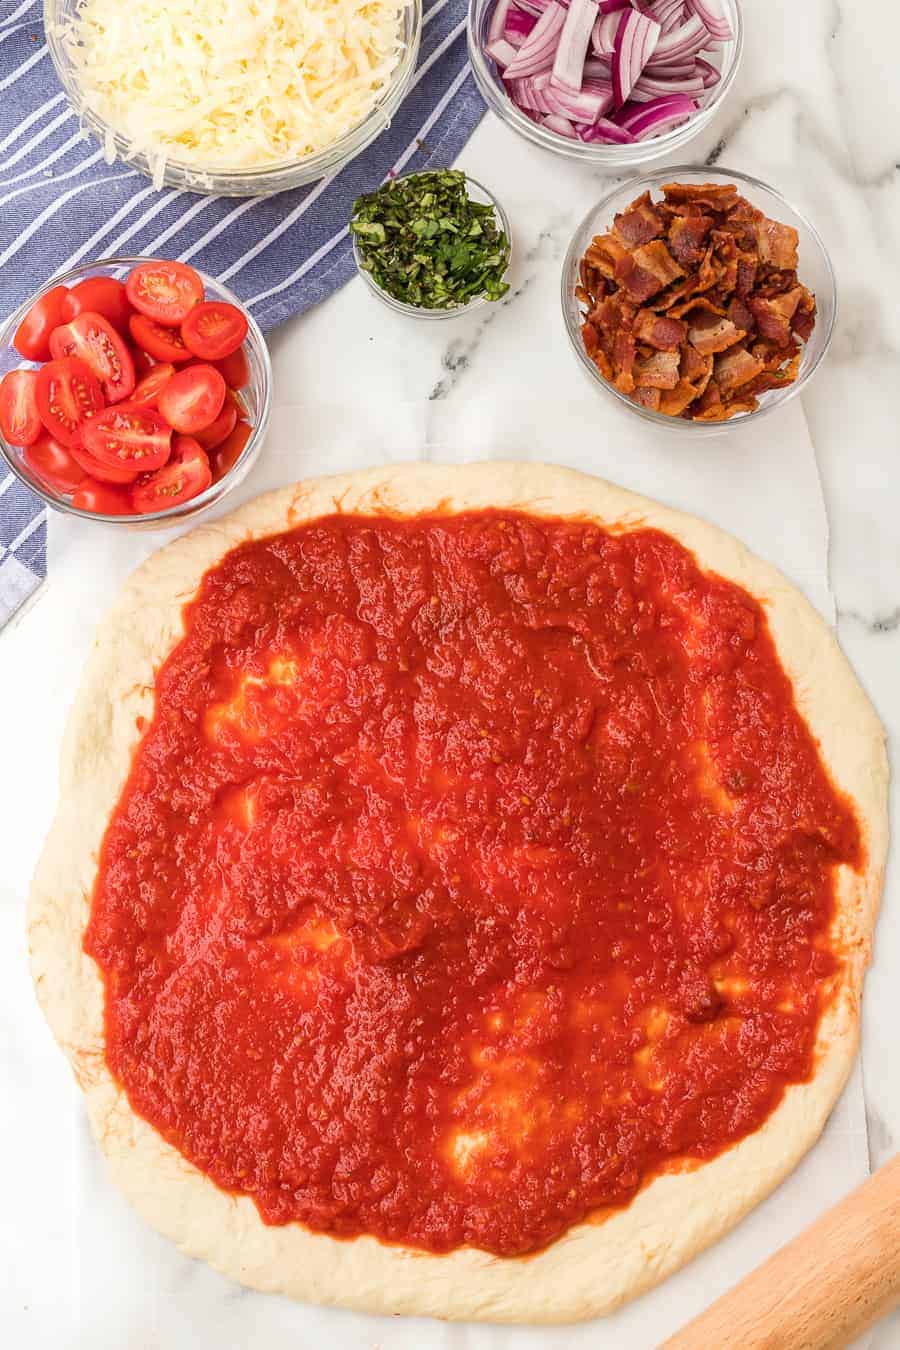 a raw pizza dough with red sauce and toppings for the a raw a whole herbed tomato and bacon pizza on parchment.